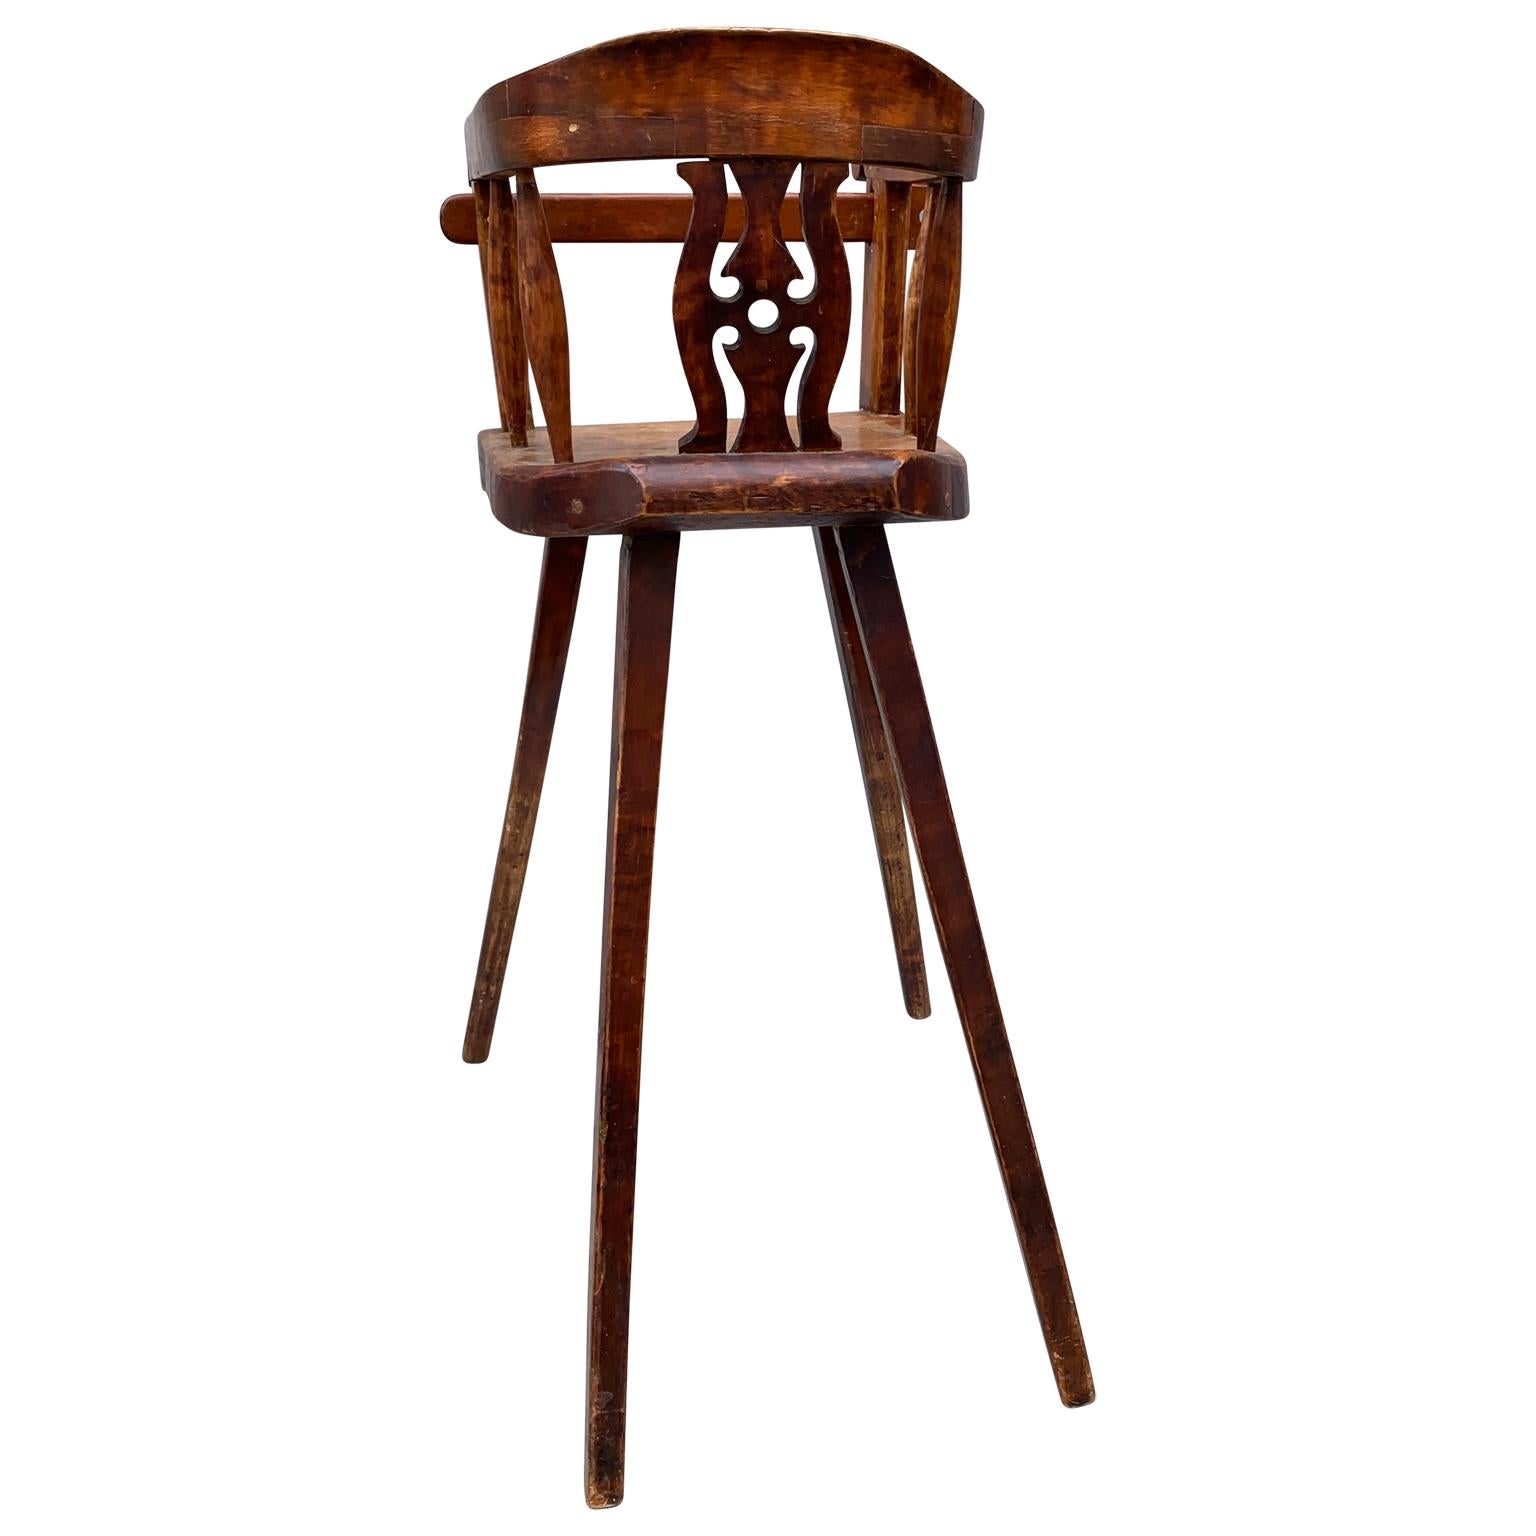 Scandinavian Swedish 19th Century Wooden Child's High Chair For Sale